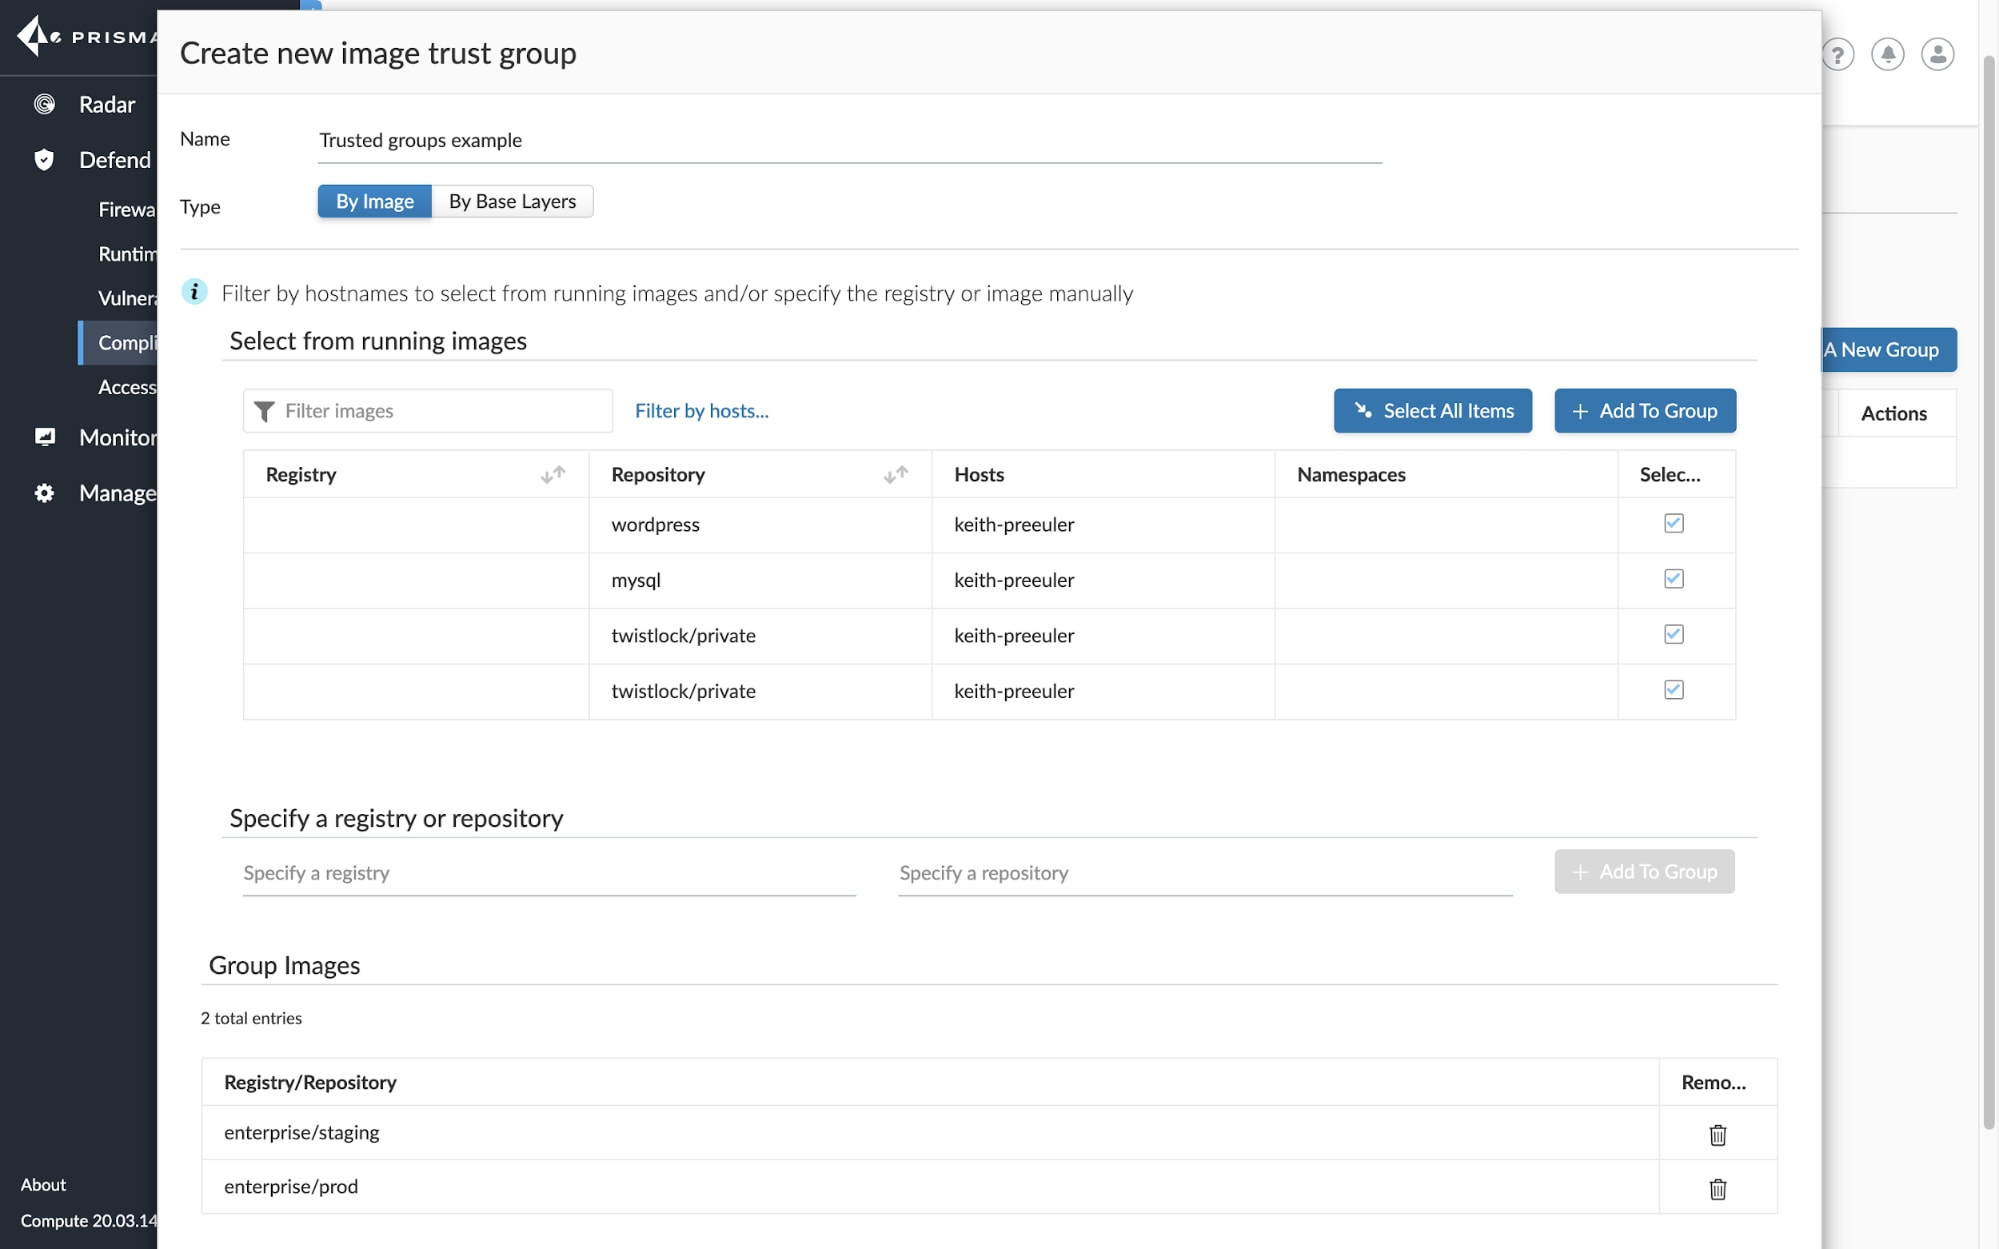 A screenshot showing how to create a new image trust group in Prisma Cloud.